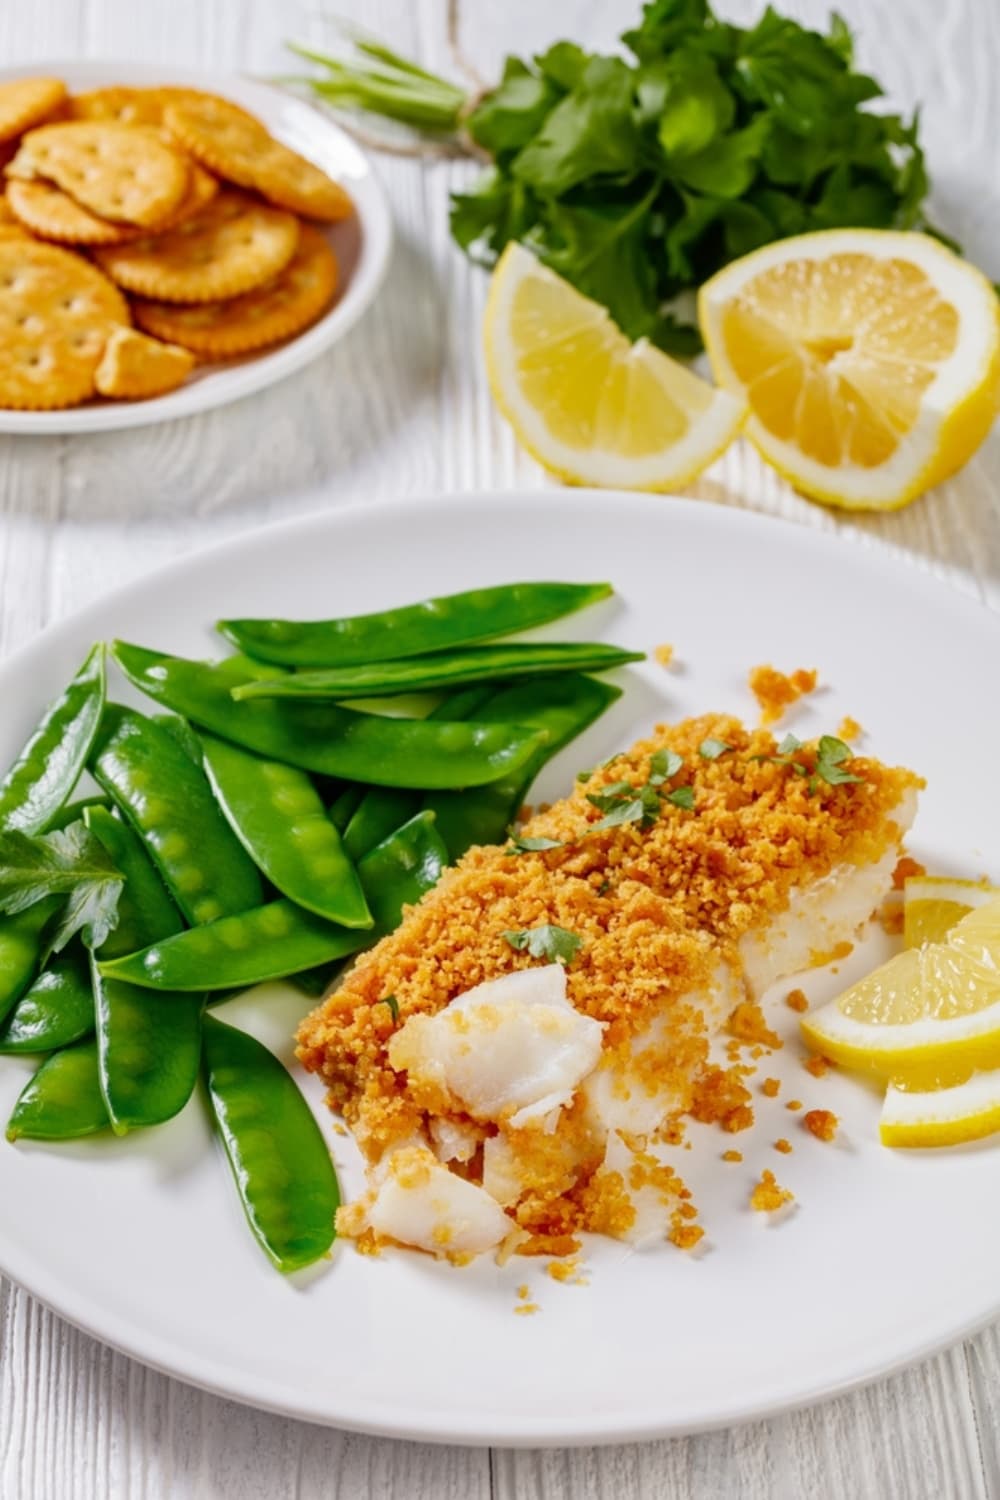 Baked Cod Served With Greens and Lemon Slices